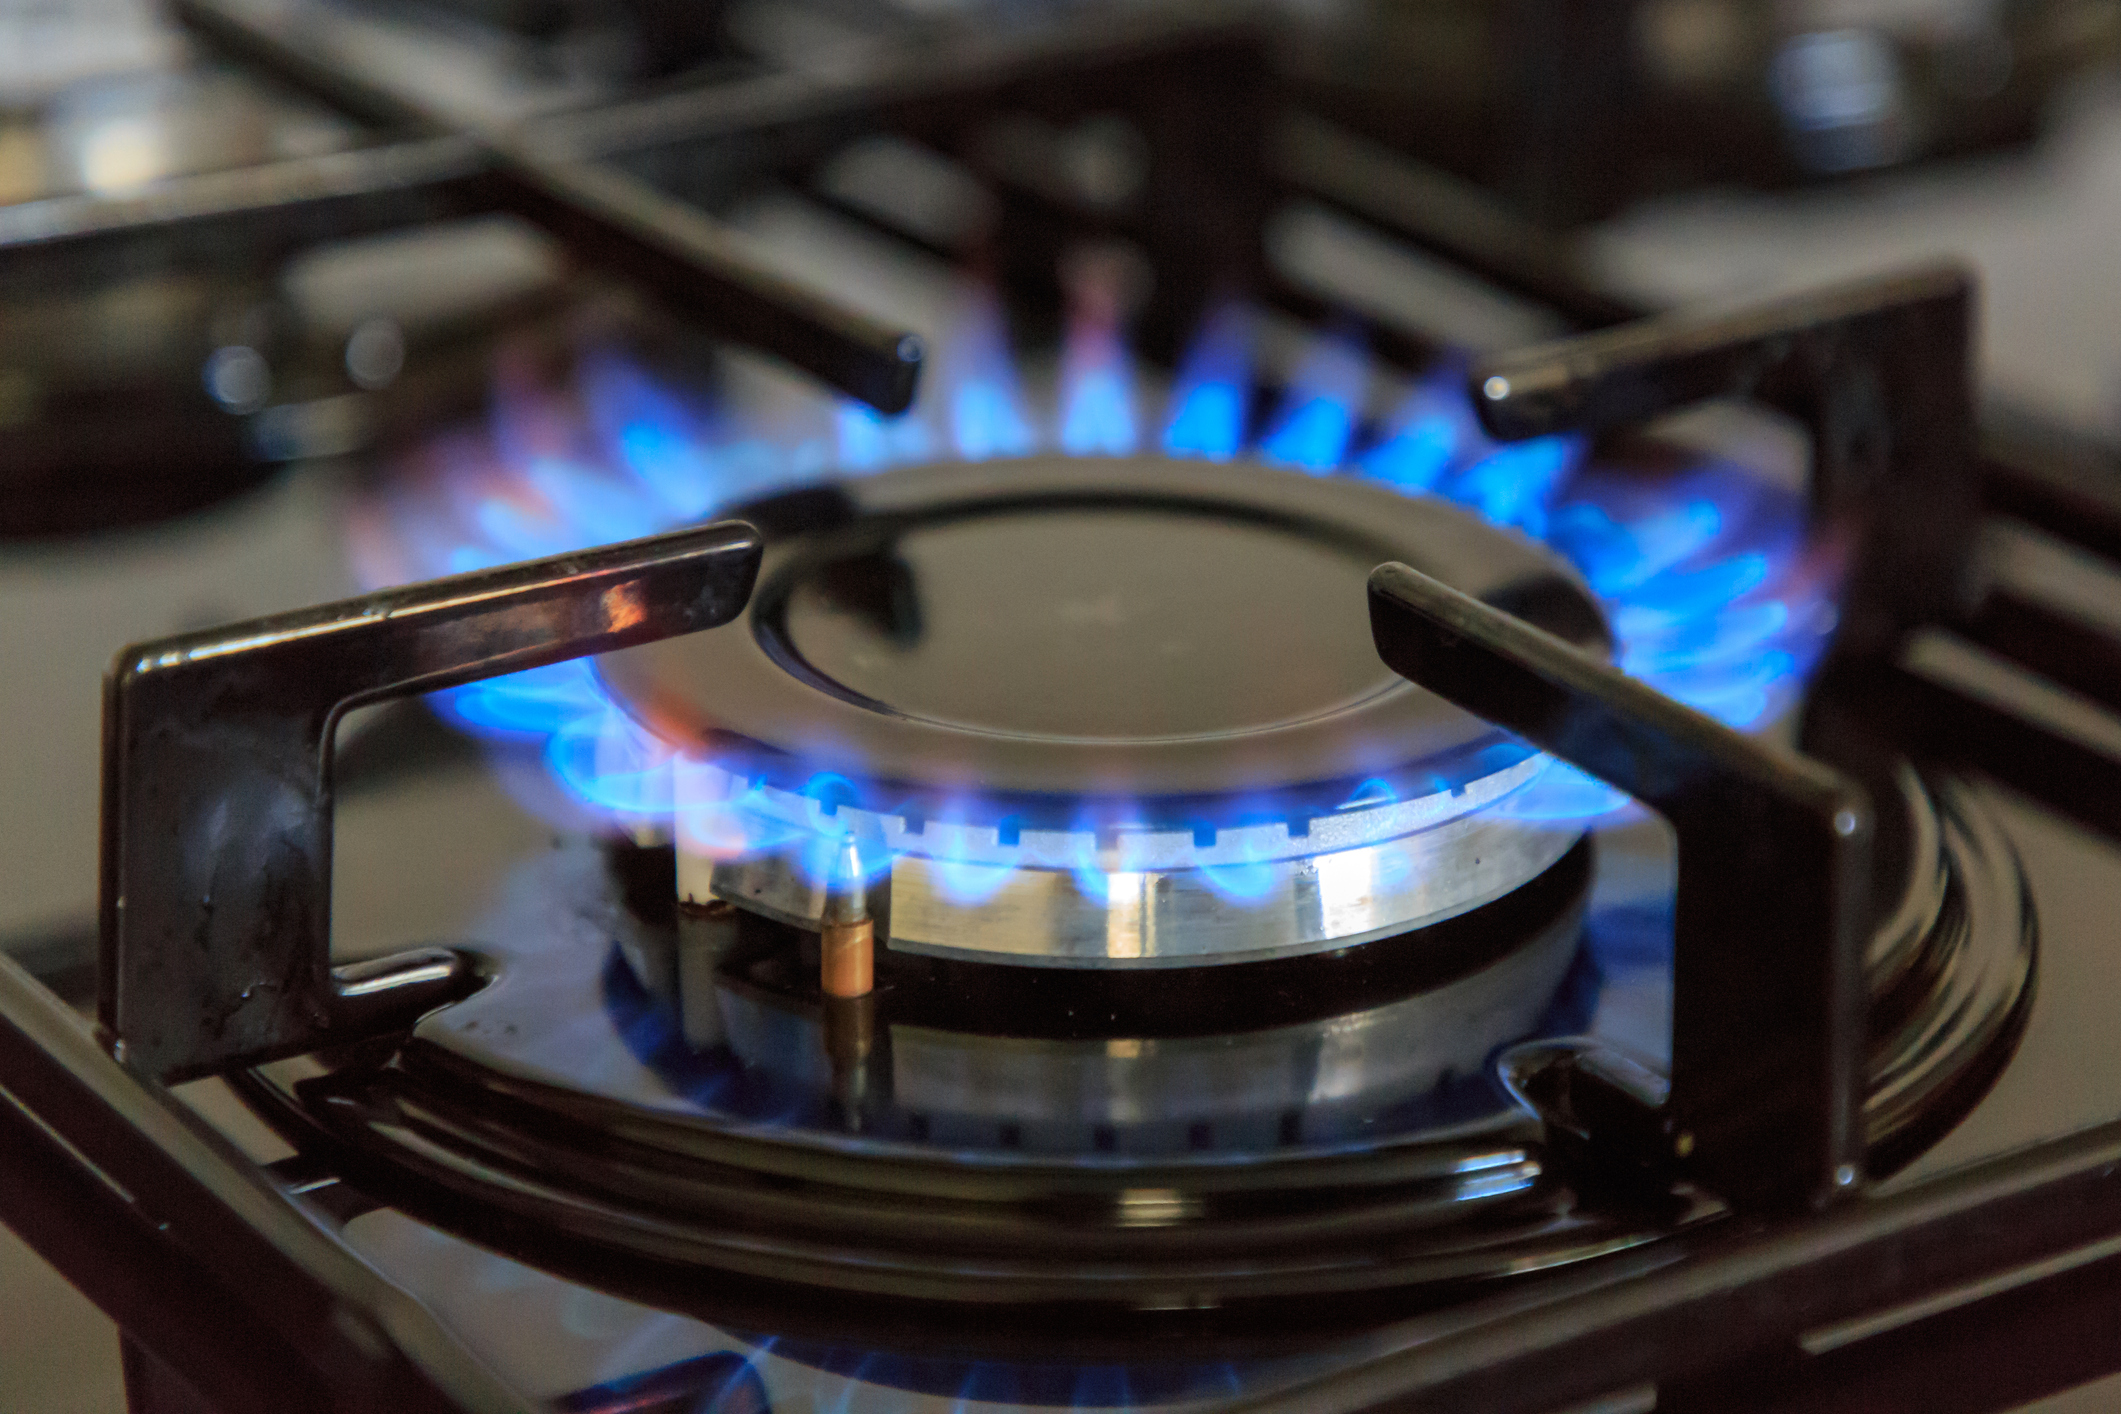 Natural gas safety: report gas smells, install and obey alarms